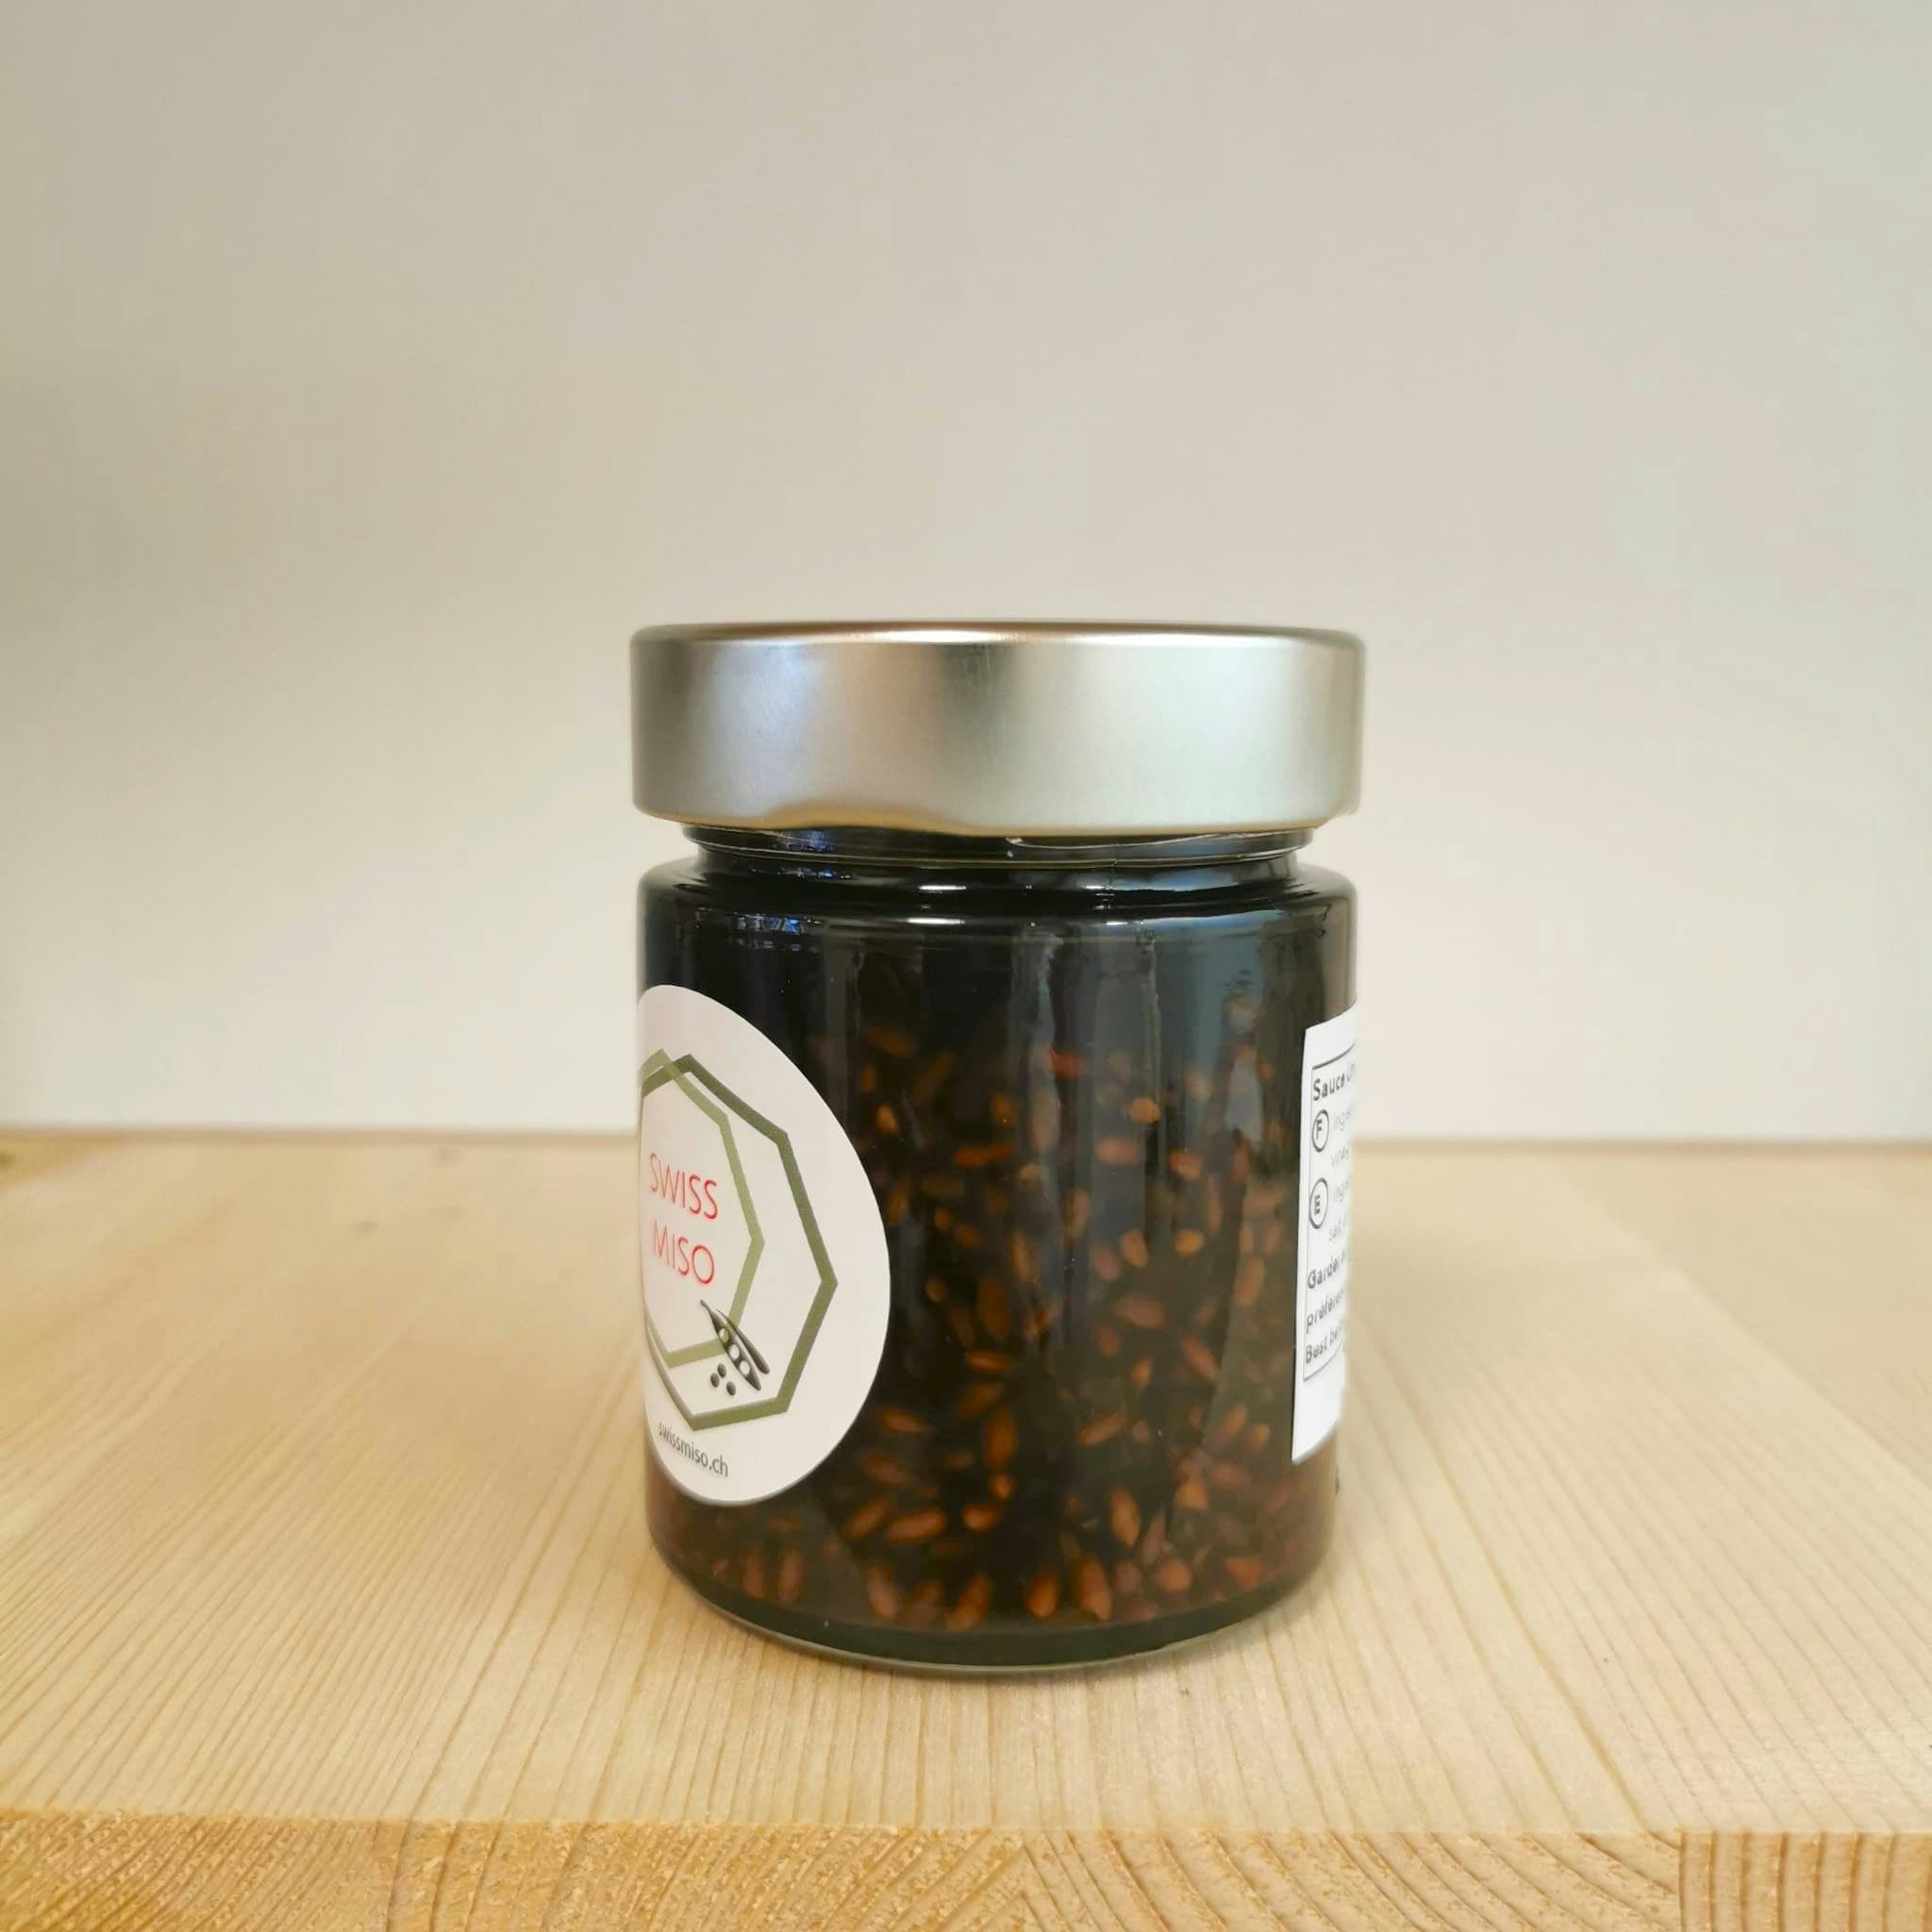 Sauce umami 160g, artisanal product for direct sale in Switzerland